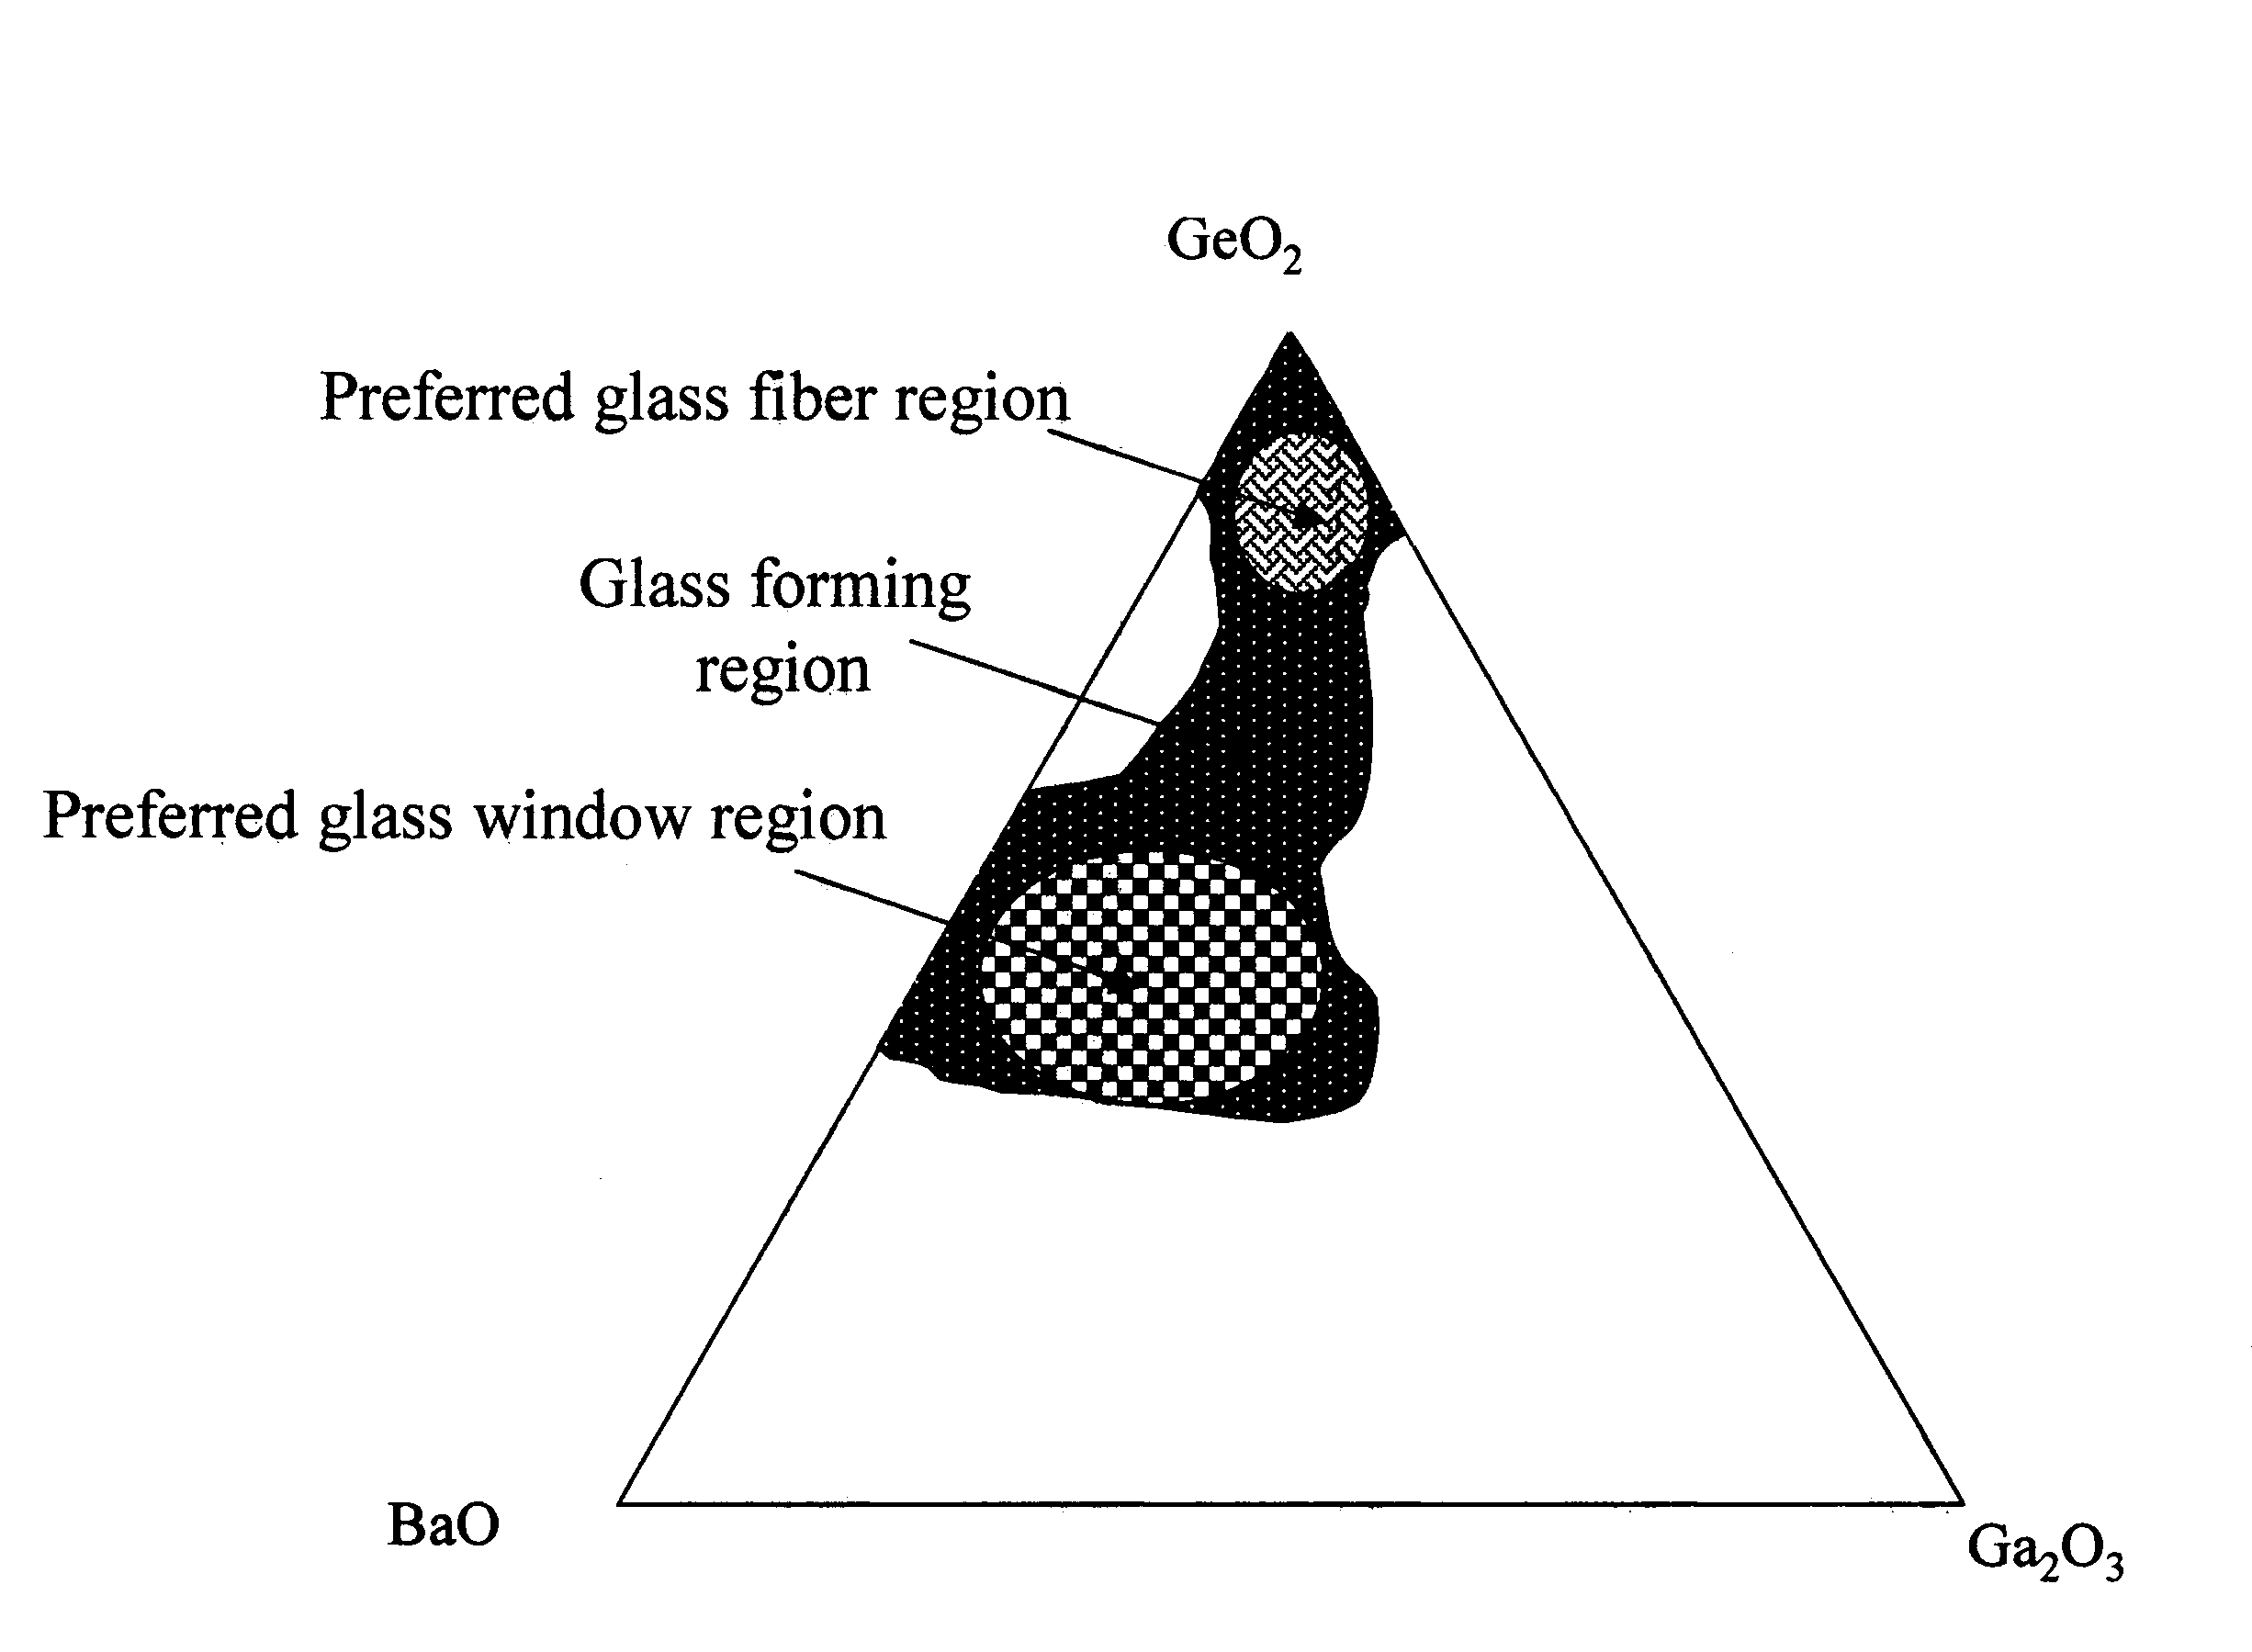 Optical transmission of BGG glass material